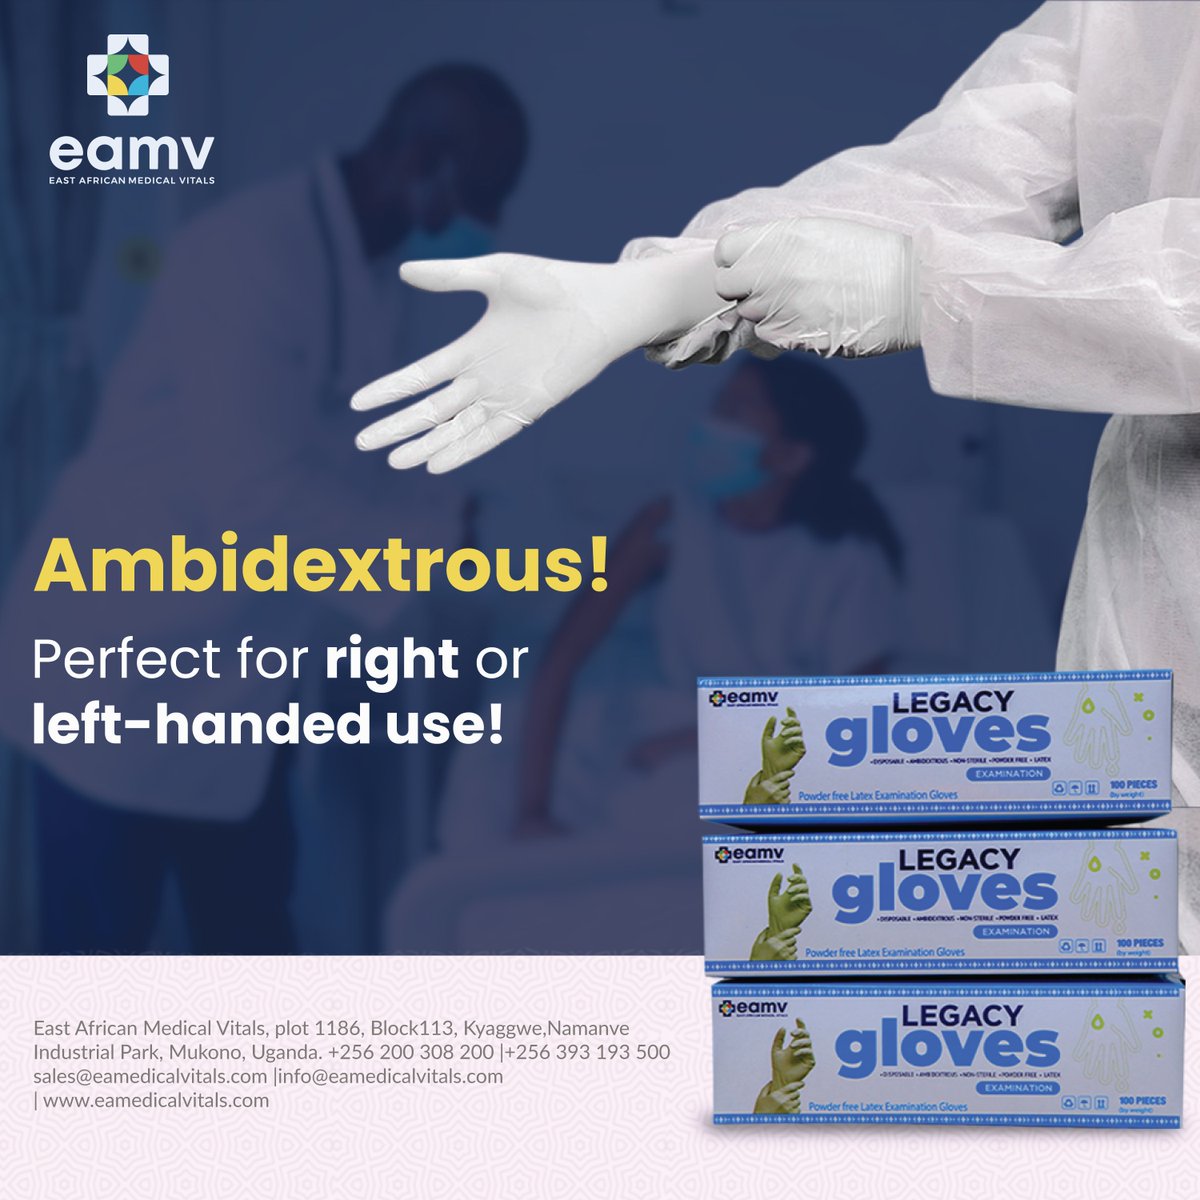 #Legacygloves are designed to fit perfectly around either hand for optimal protection and comfort.

Protect your life and the lives of your patients by using high-quality, affordable gloves.

#Powderfree #BUBU #gloves